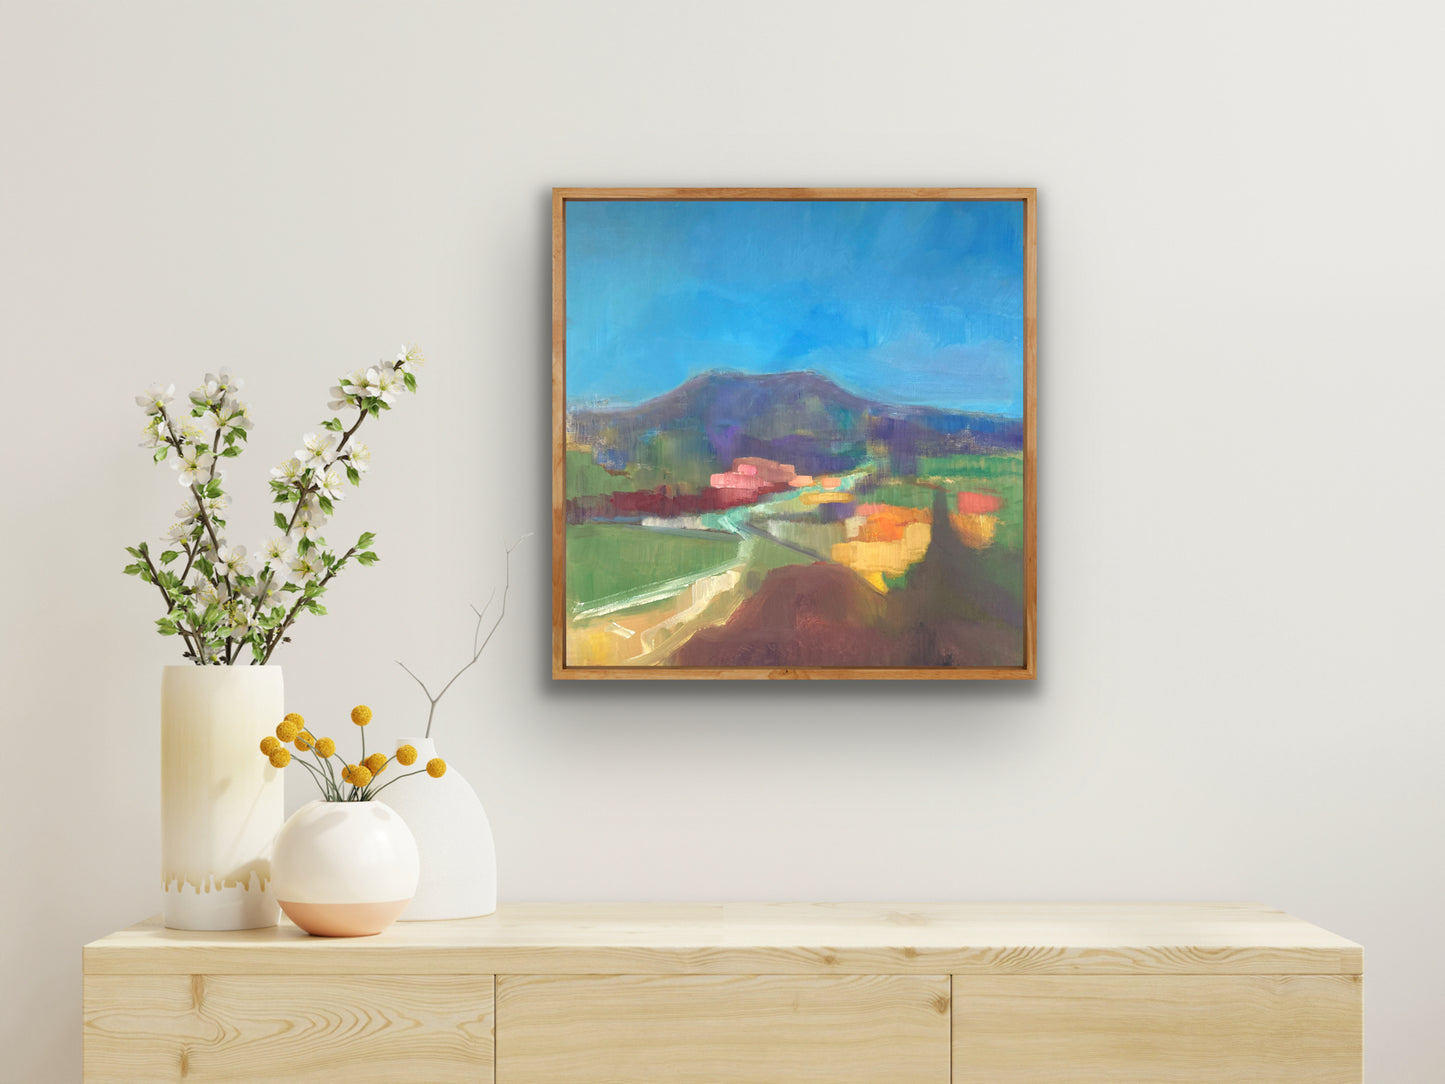 Frolicking in the Flatirons - Original Oil Painting by Peg Connery-Boyd